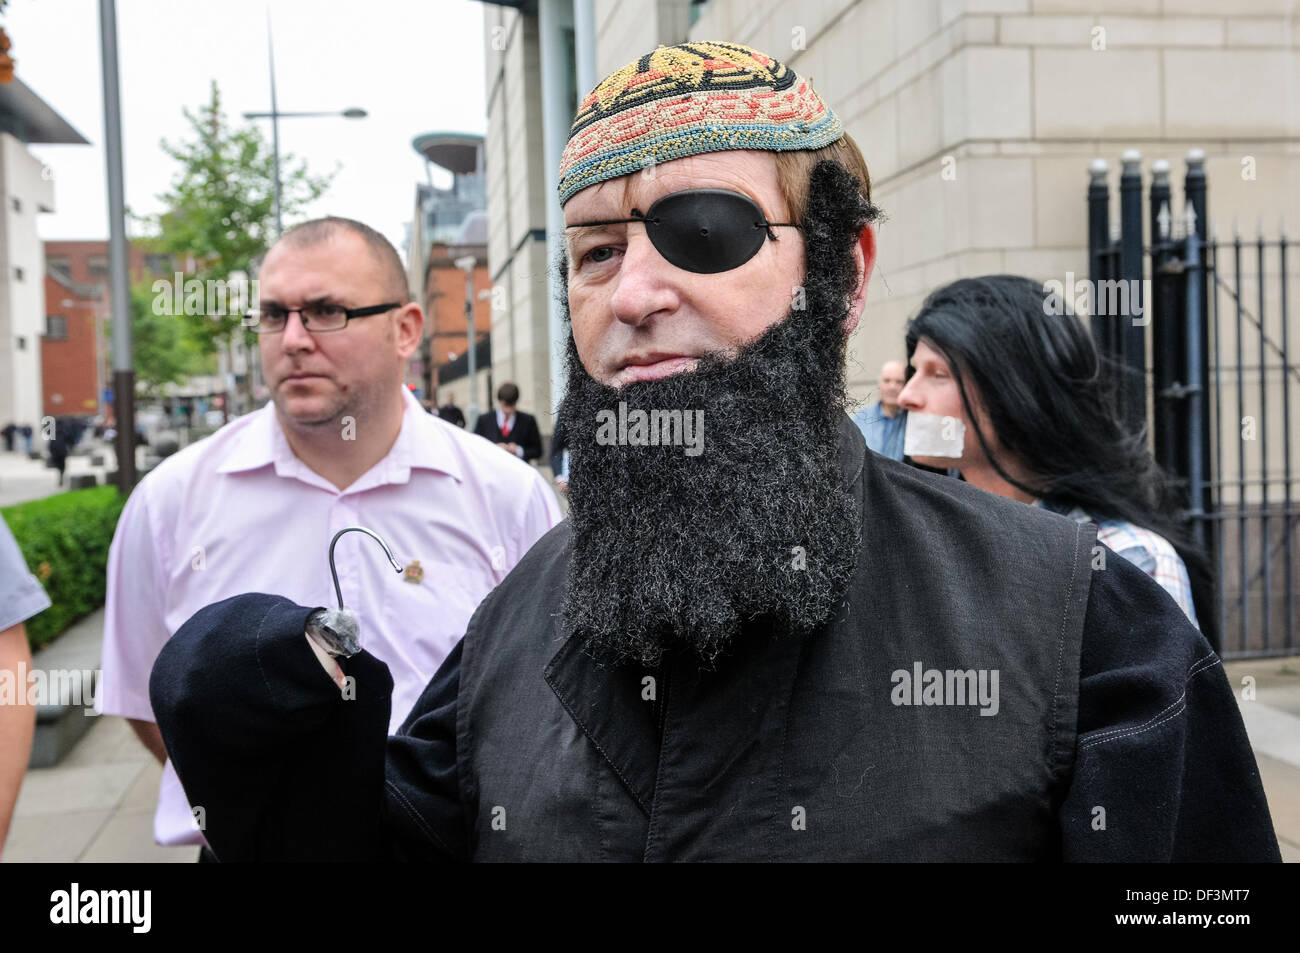 Belfast, Northern Ireland, 27th September 2013 - Protestant Coalition founder member Willie Frazer appears in court dressed as Abu Hamza. He is protesting that he is being charged under legislation aimed at curbing "infamous Muslim hate preachers". Credit:  Stephen Barnes/Alamy Live News Stock Photo